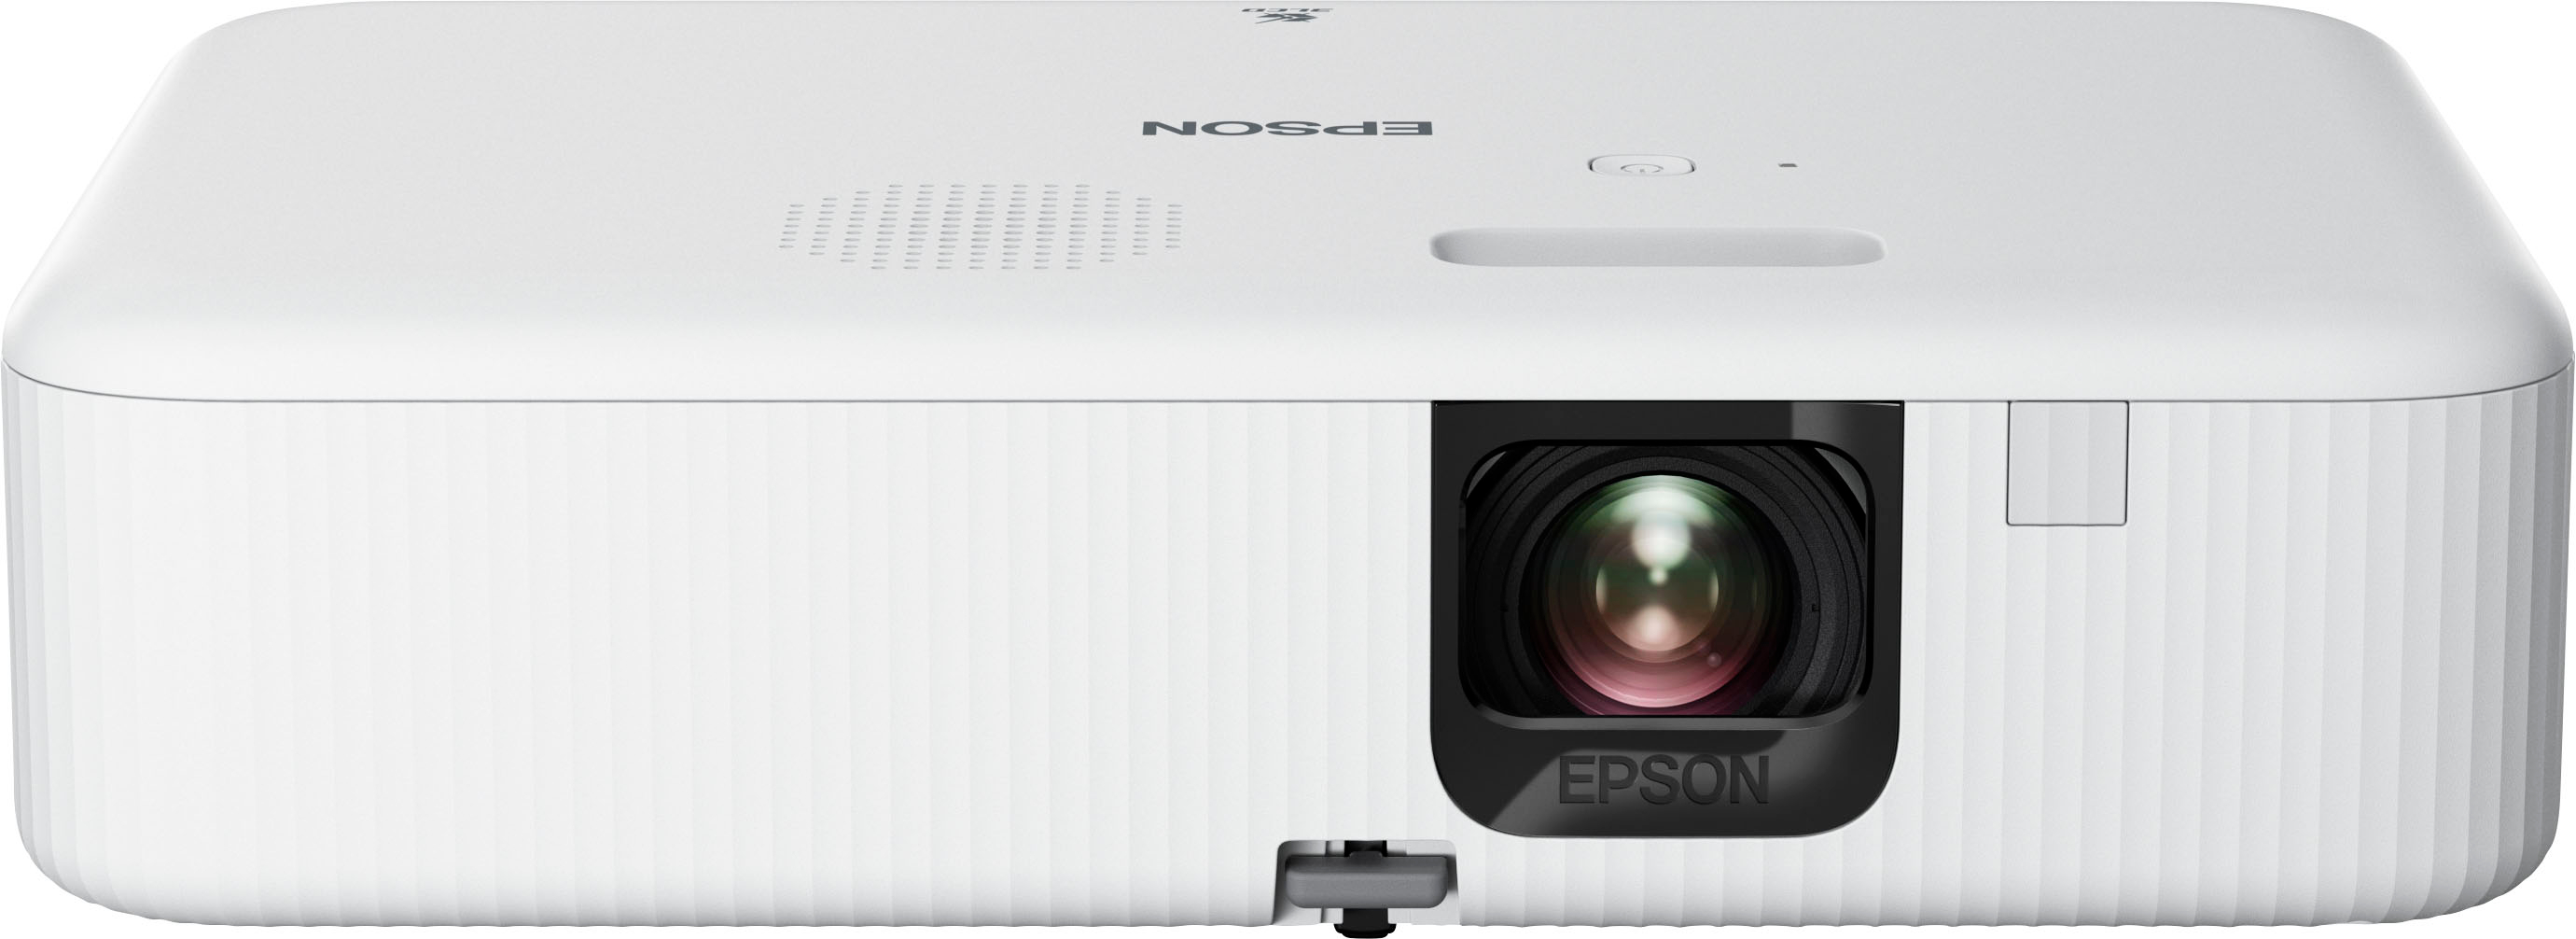 PC-Less Projectors Make Meetings Better with Just a USB Stick